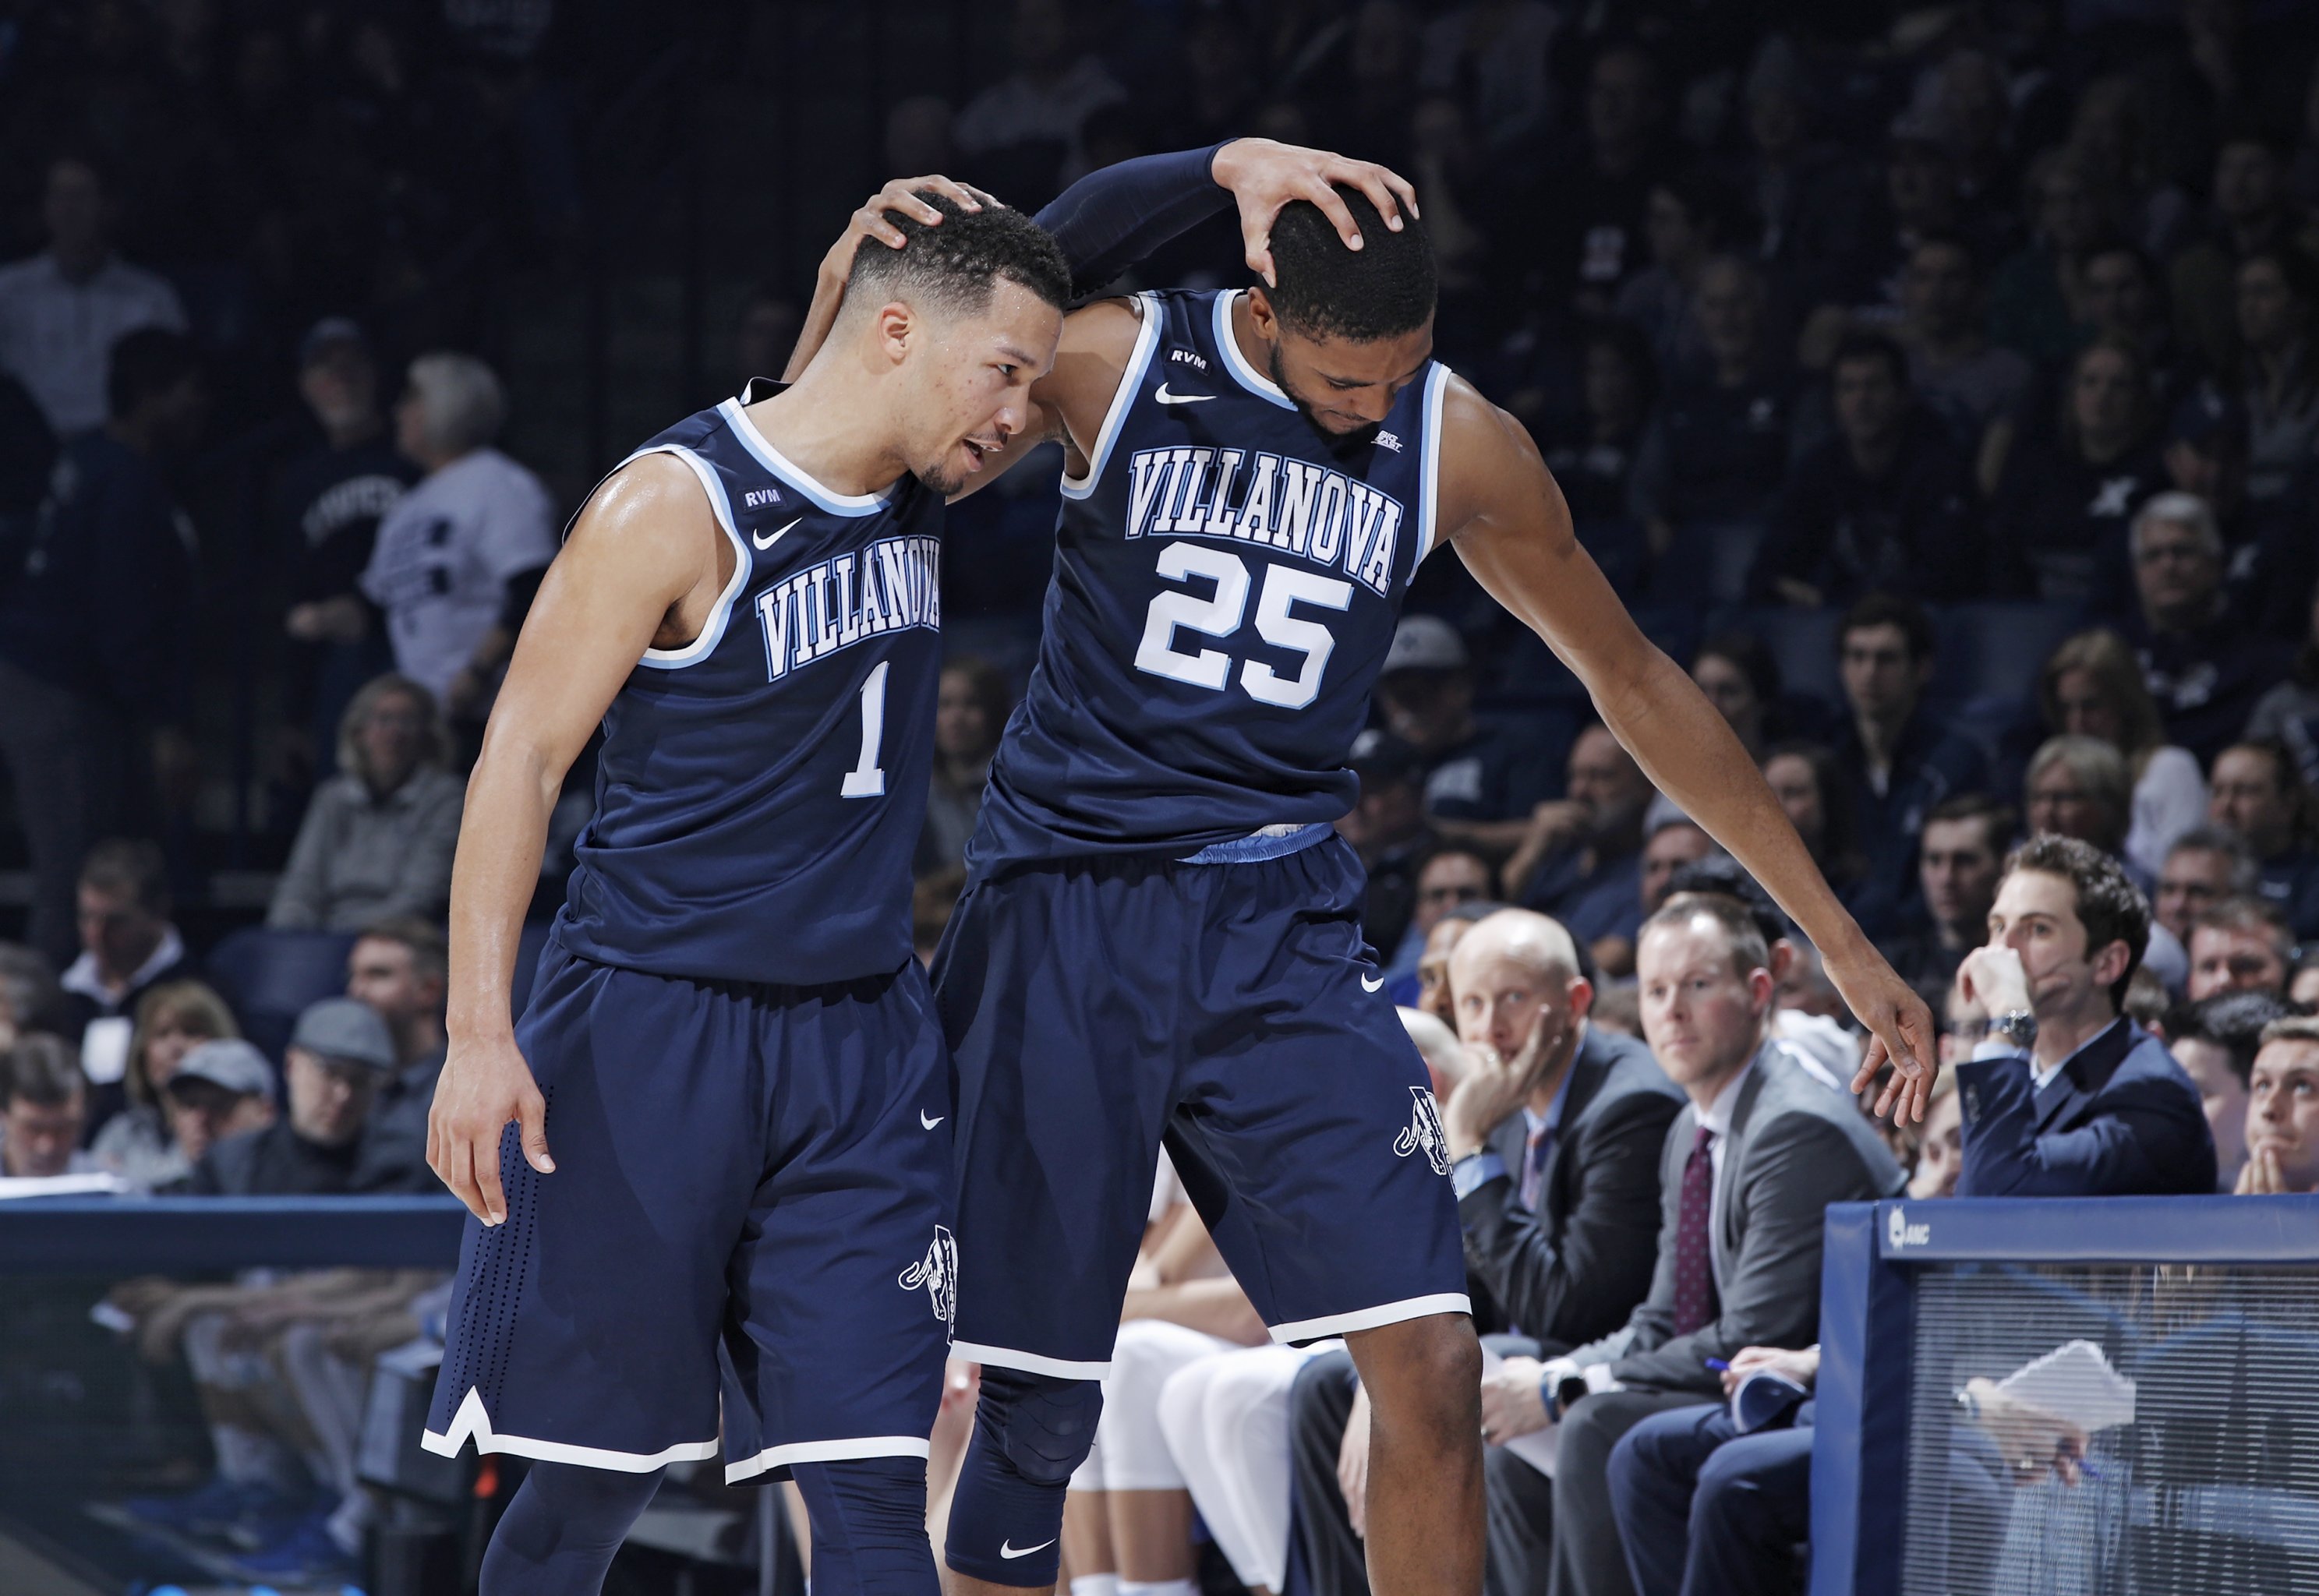 Donte DiVincenzo's block became best photo from Villanova's title win